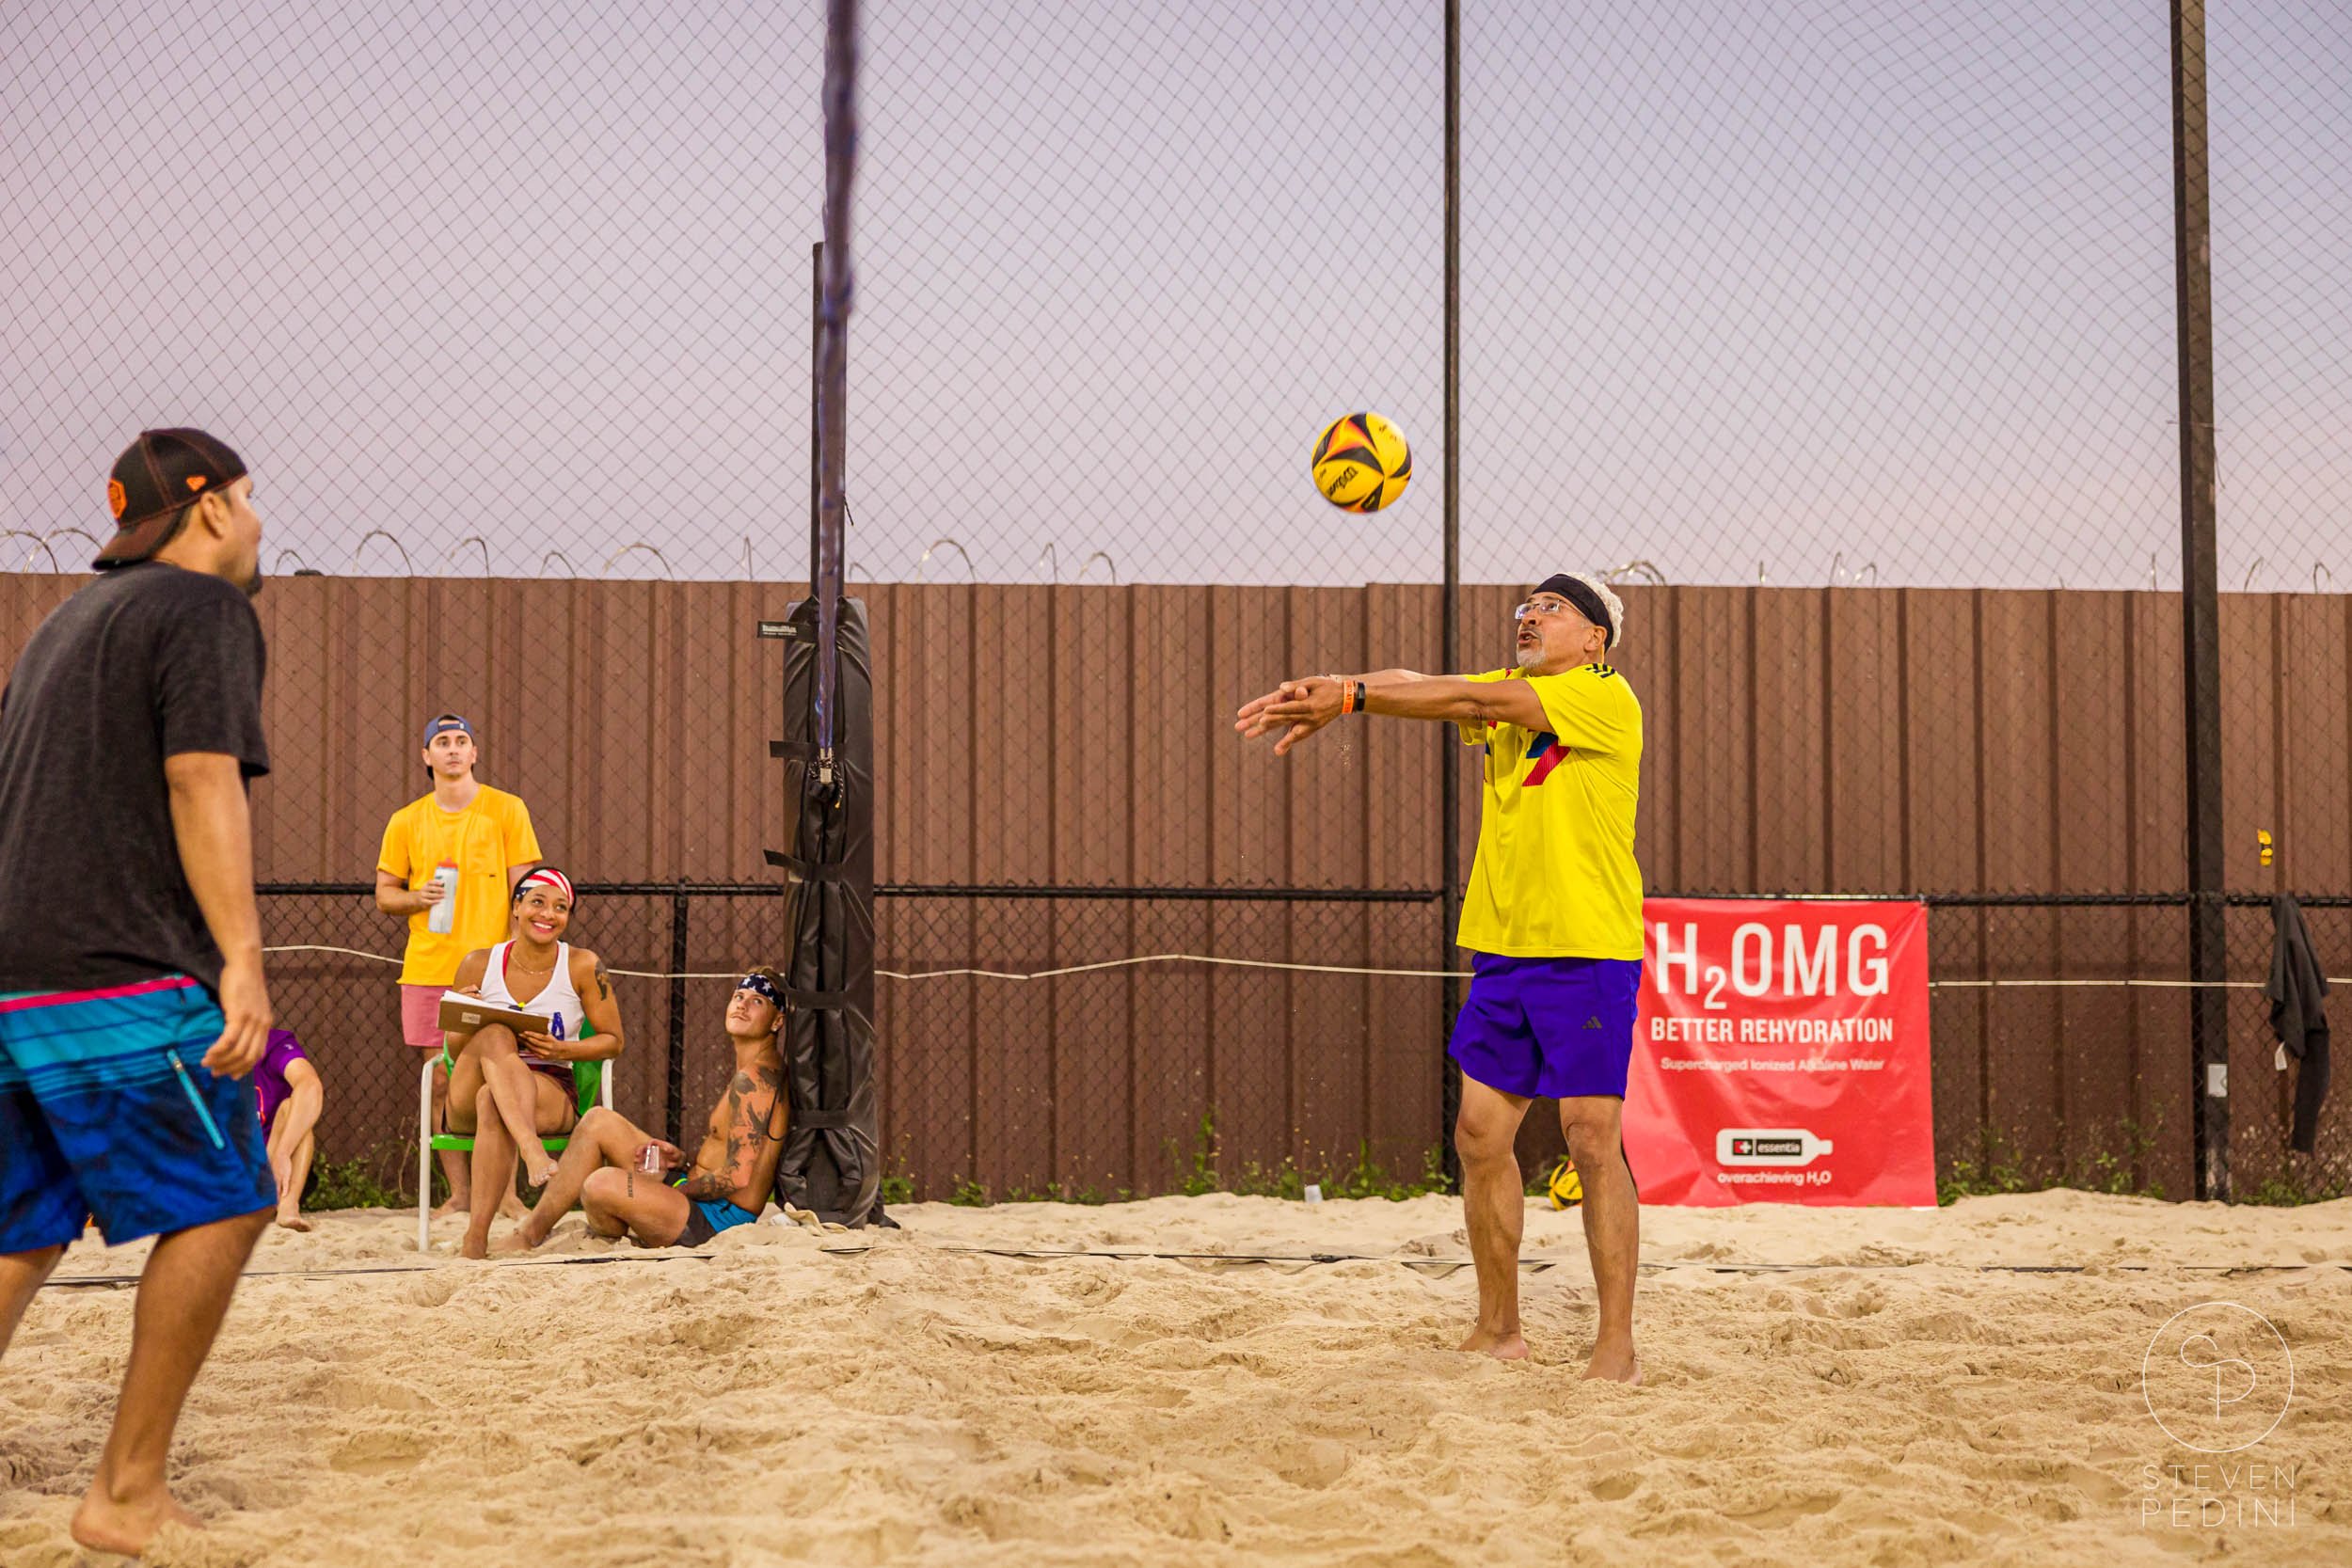 Steven Pedini Photography - Bumpy Pickle - Sand Volleyball - Houston TX - World Cup of Volleyball - 00279.jpg